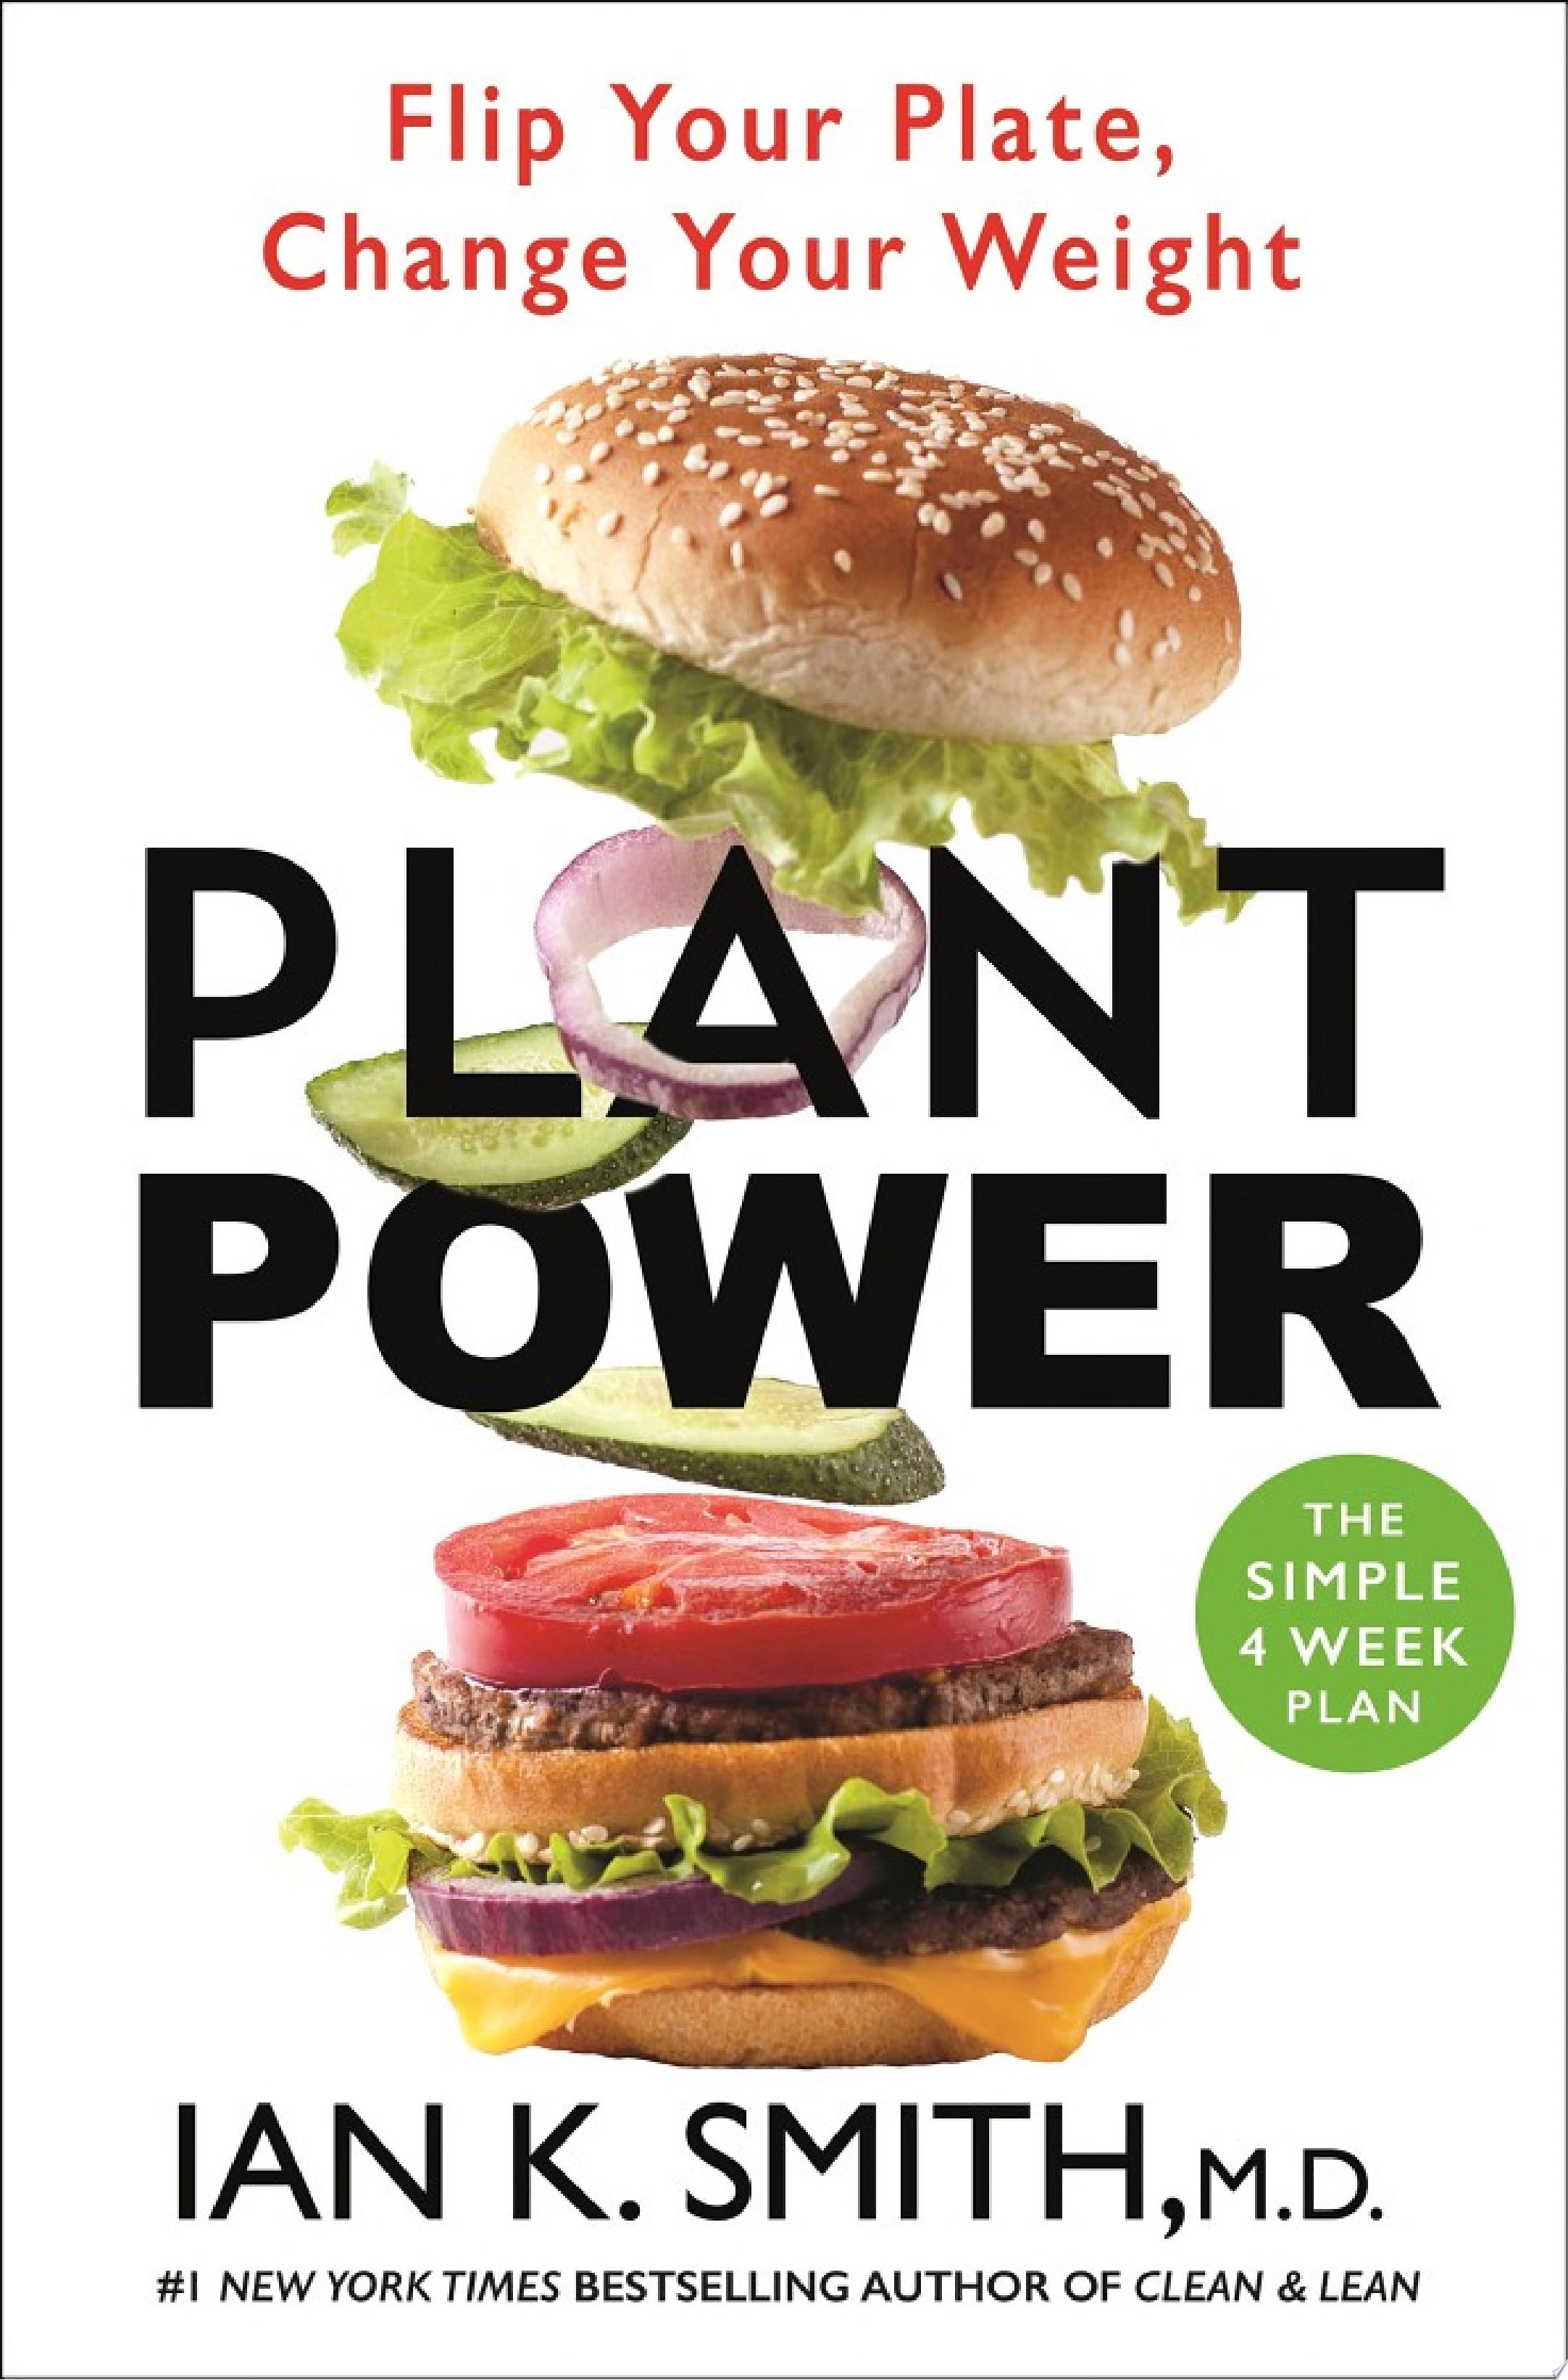 Image for "Plant Power"